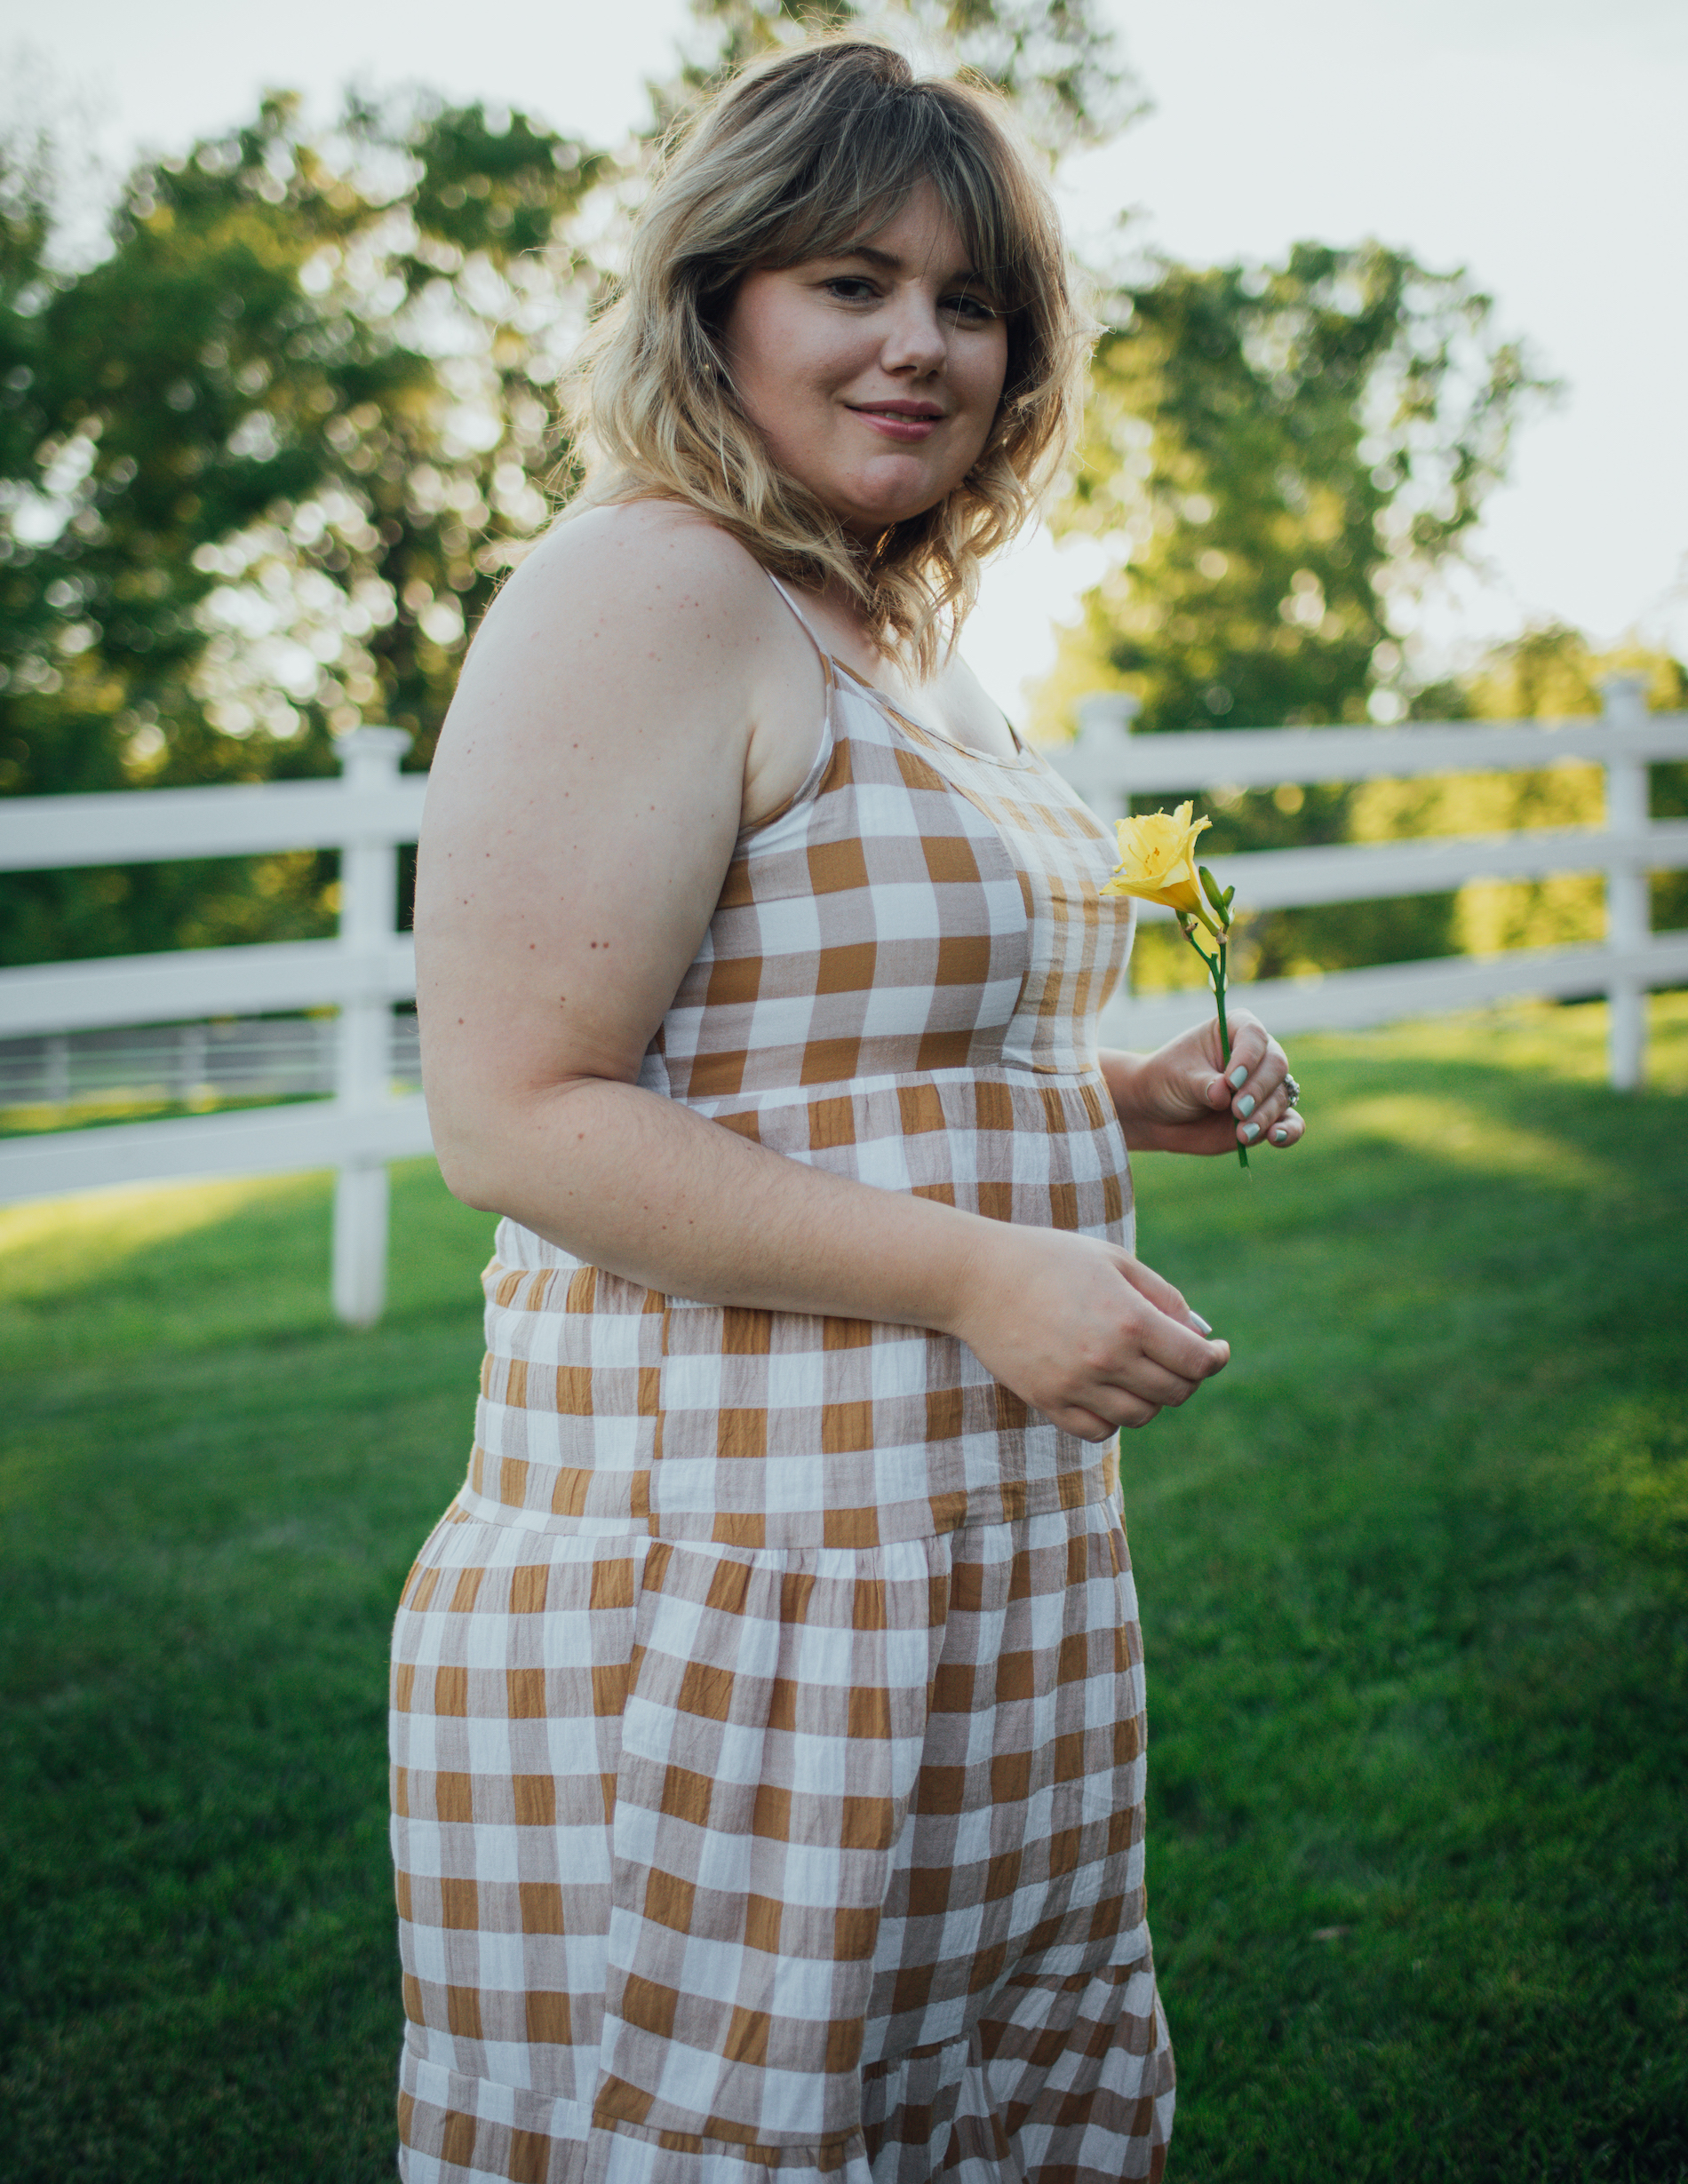 Sharing some summer midi dresses, that are perfect for long warm summer days! Plus size midi dresses are easy to style and look great. 